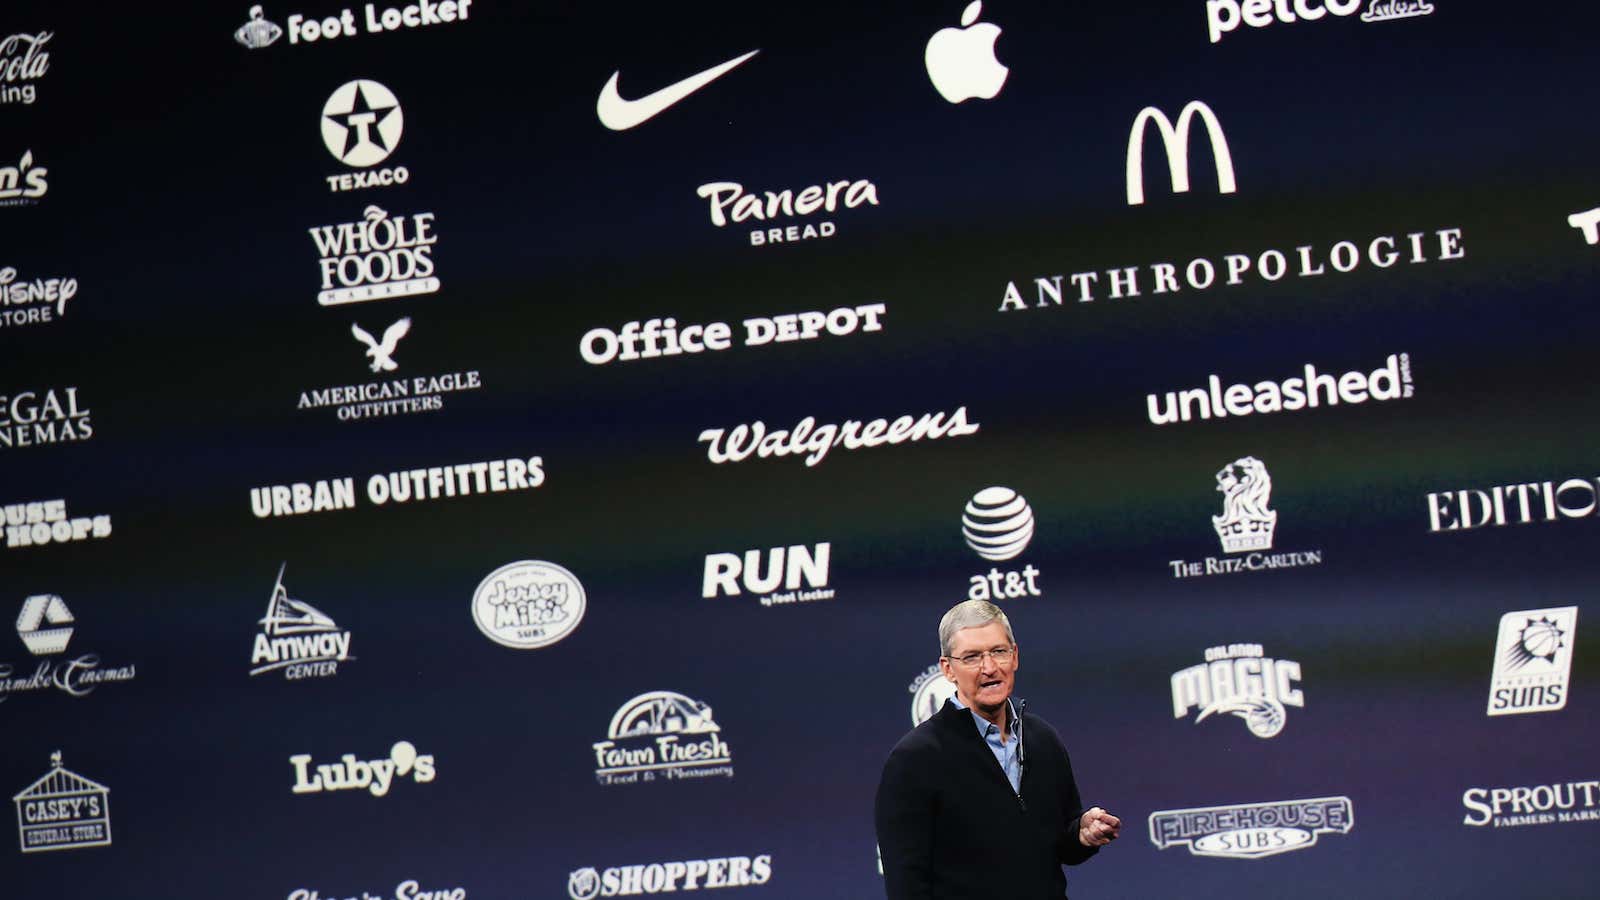 Many of these retailers are also adding Apple Pay to their websites.